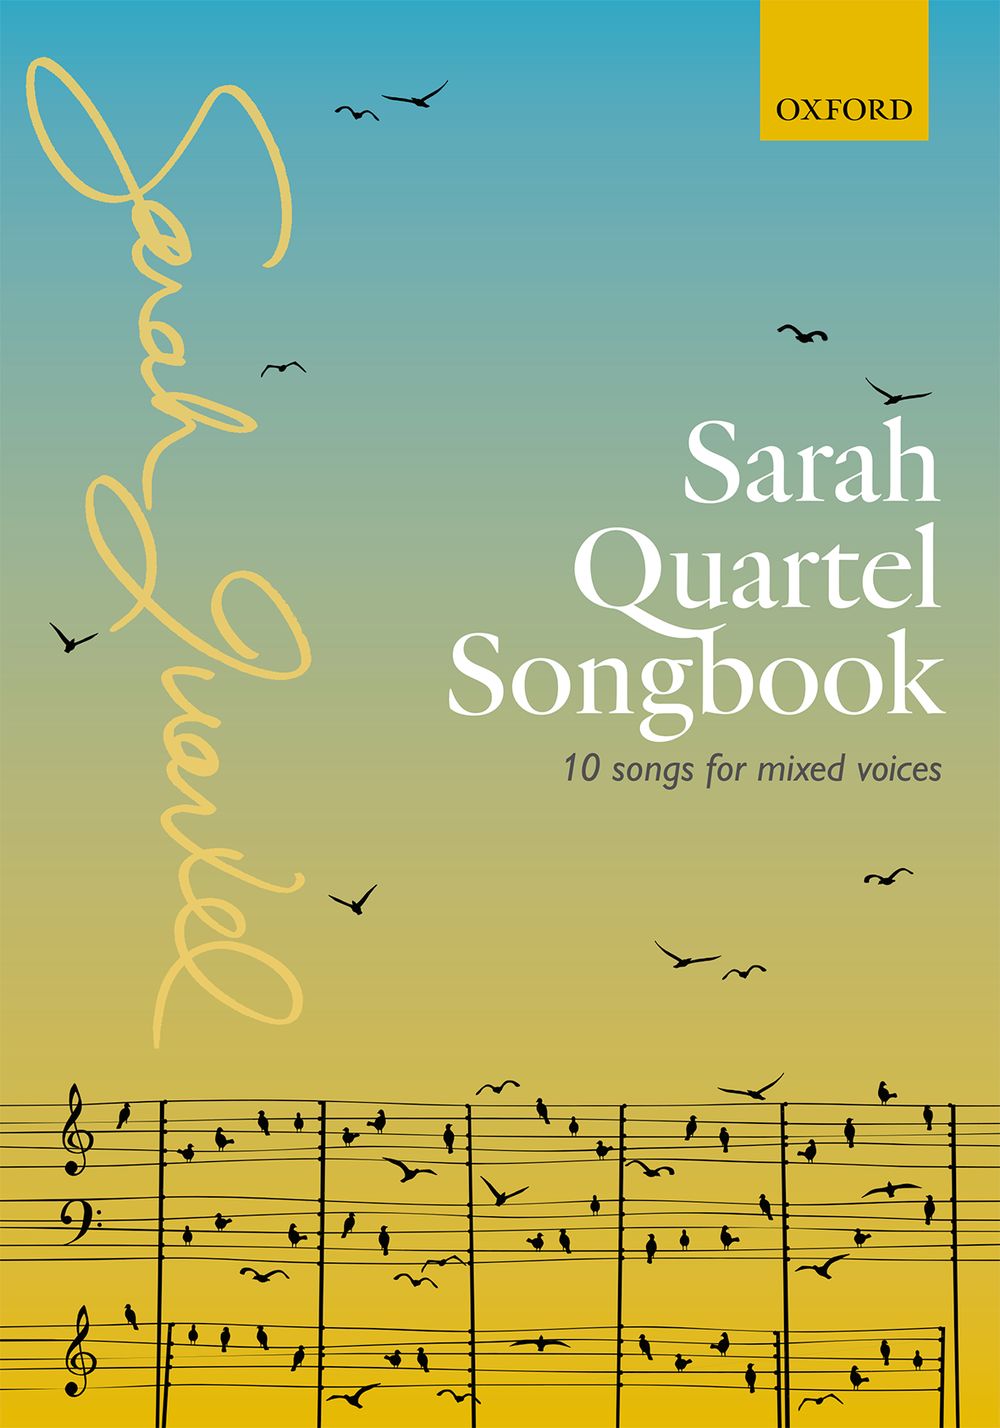 Sarah Quartel Songbook 10 Songs For Mixed Voices Sheet Music Songbook